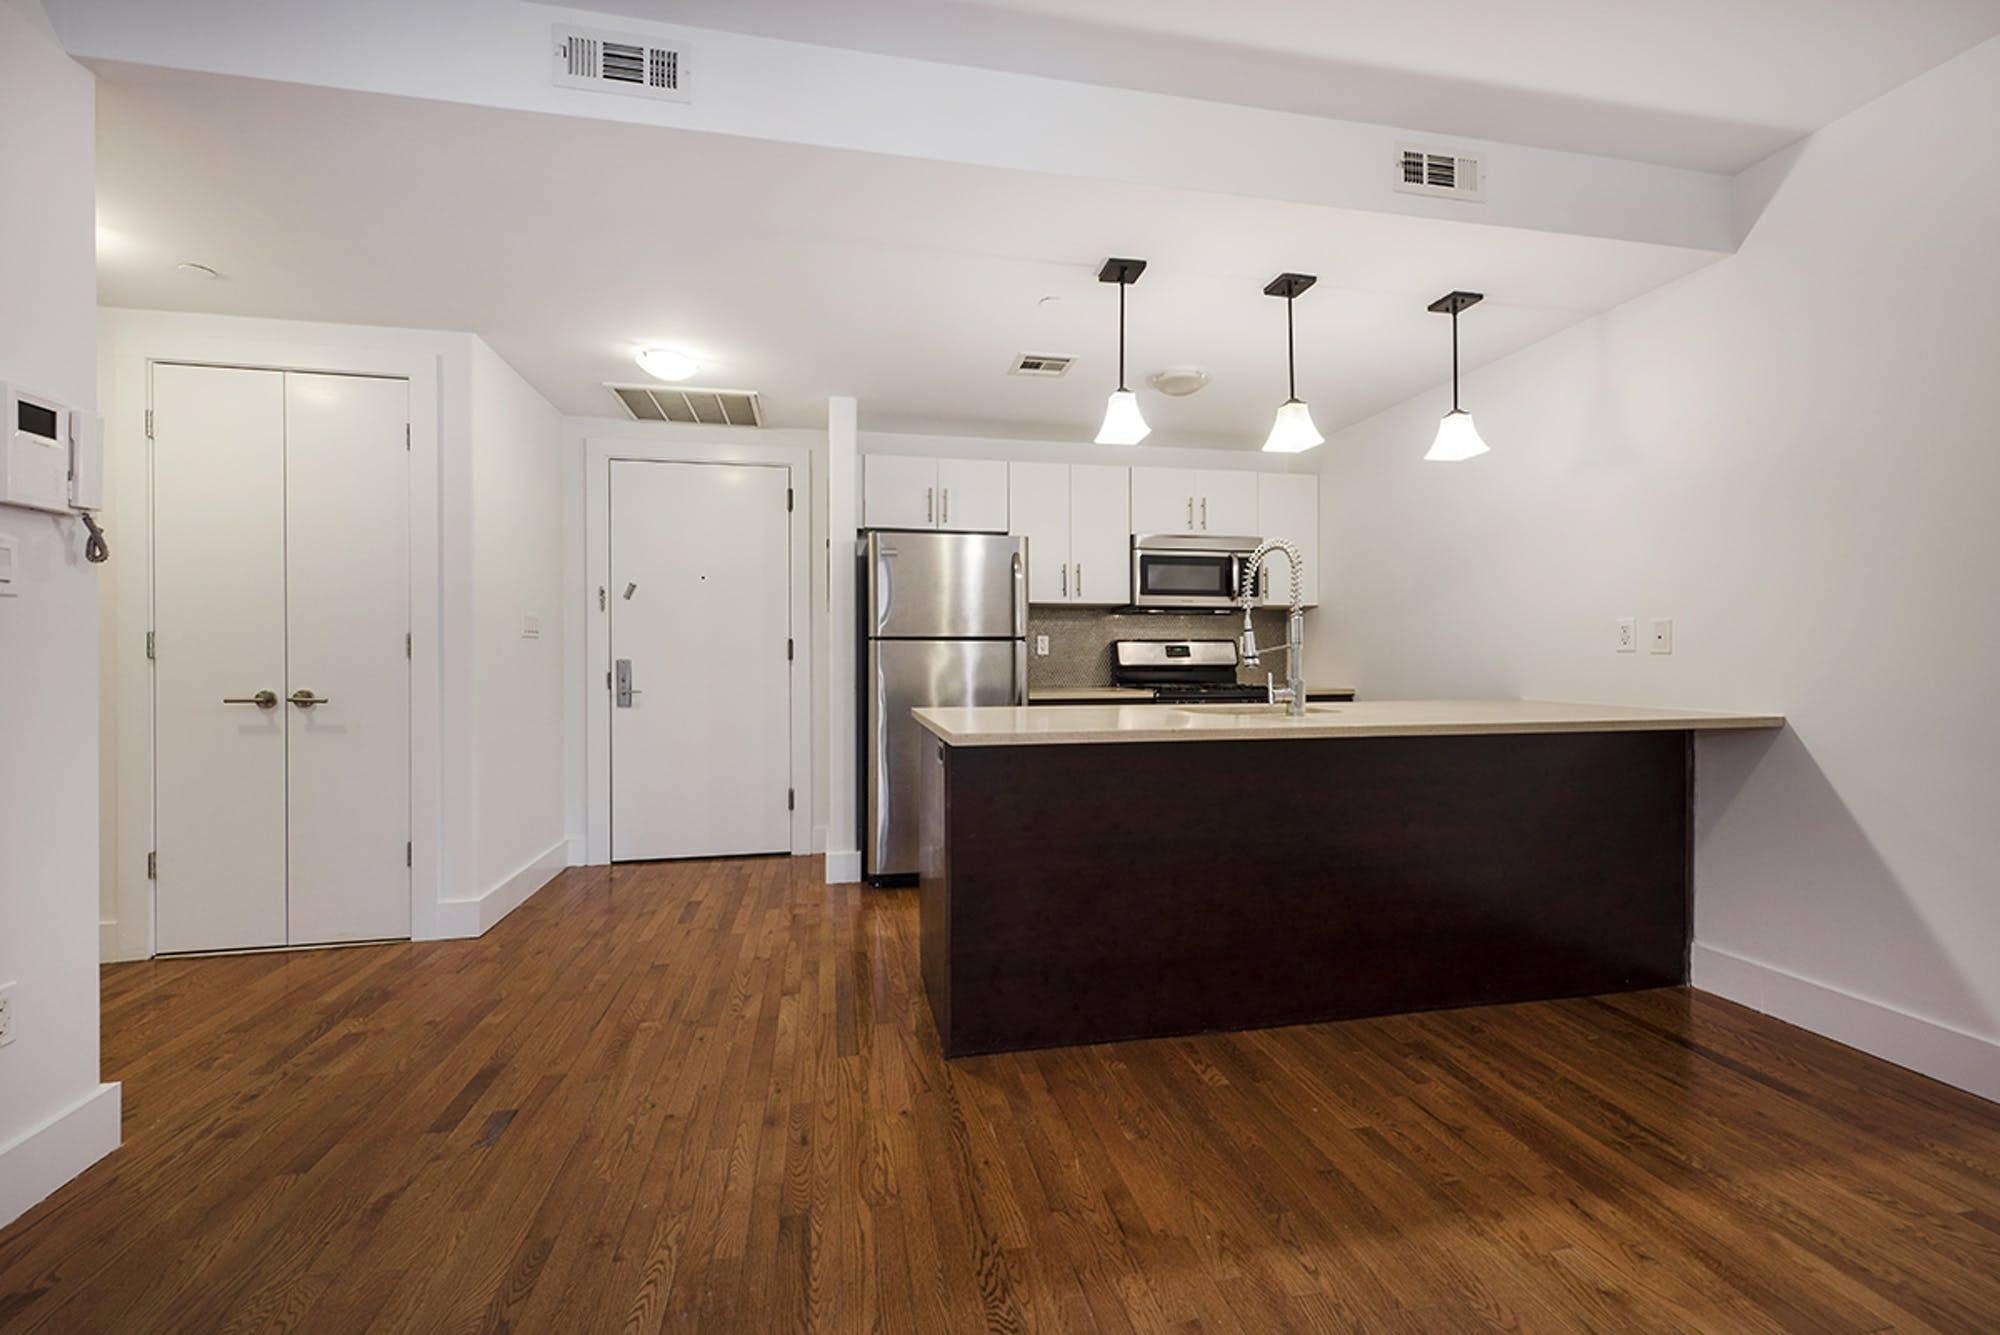 VIDEO TOUR AVAILABLE PLEASE INQUIRE WITH JAMES New to the market 80 Meserole is a recently developed building that has come to define Williamsburg living.